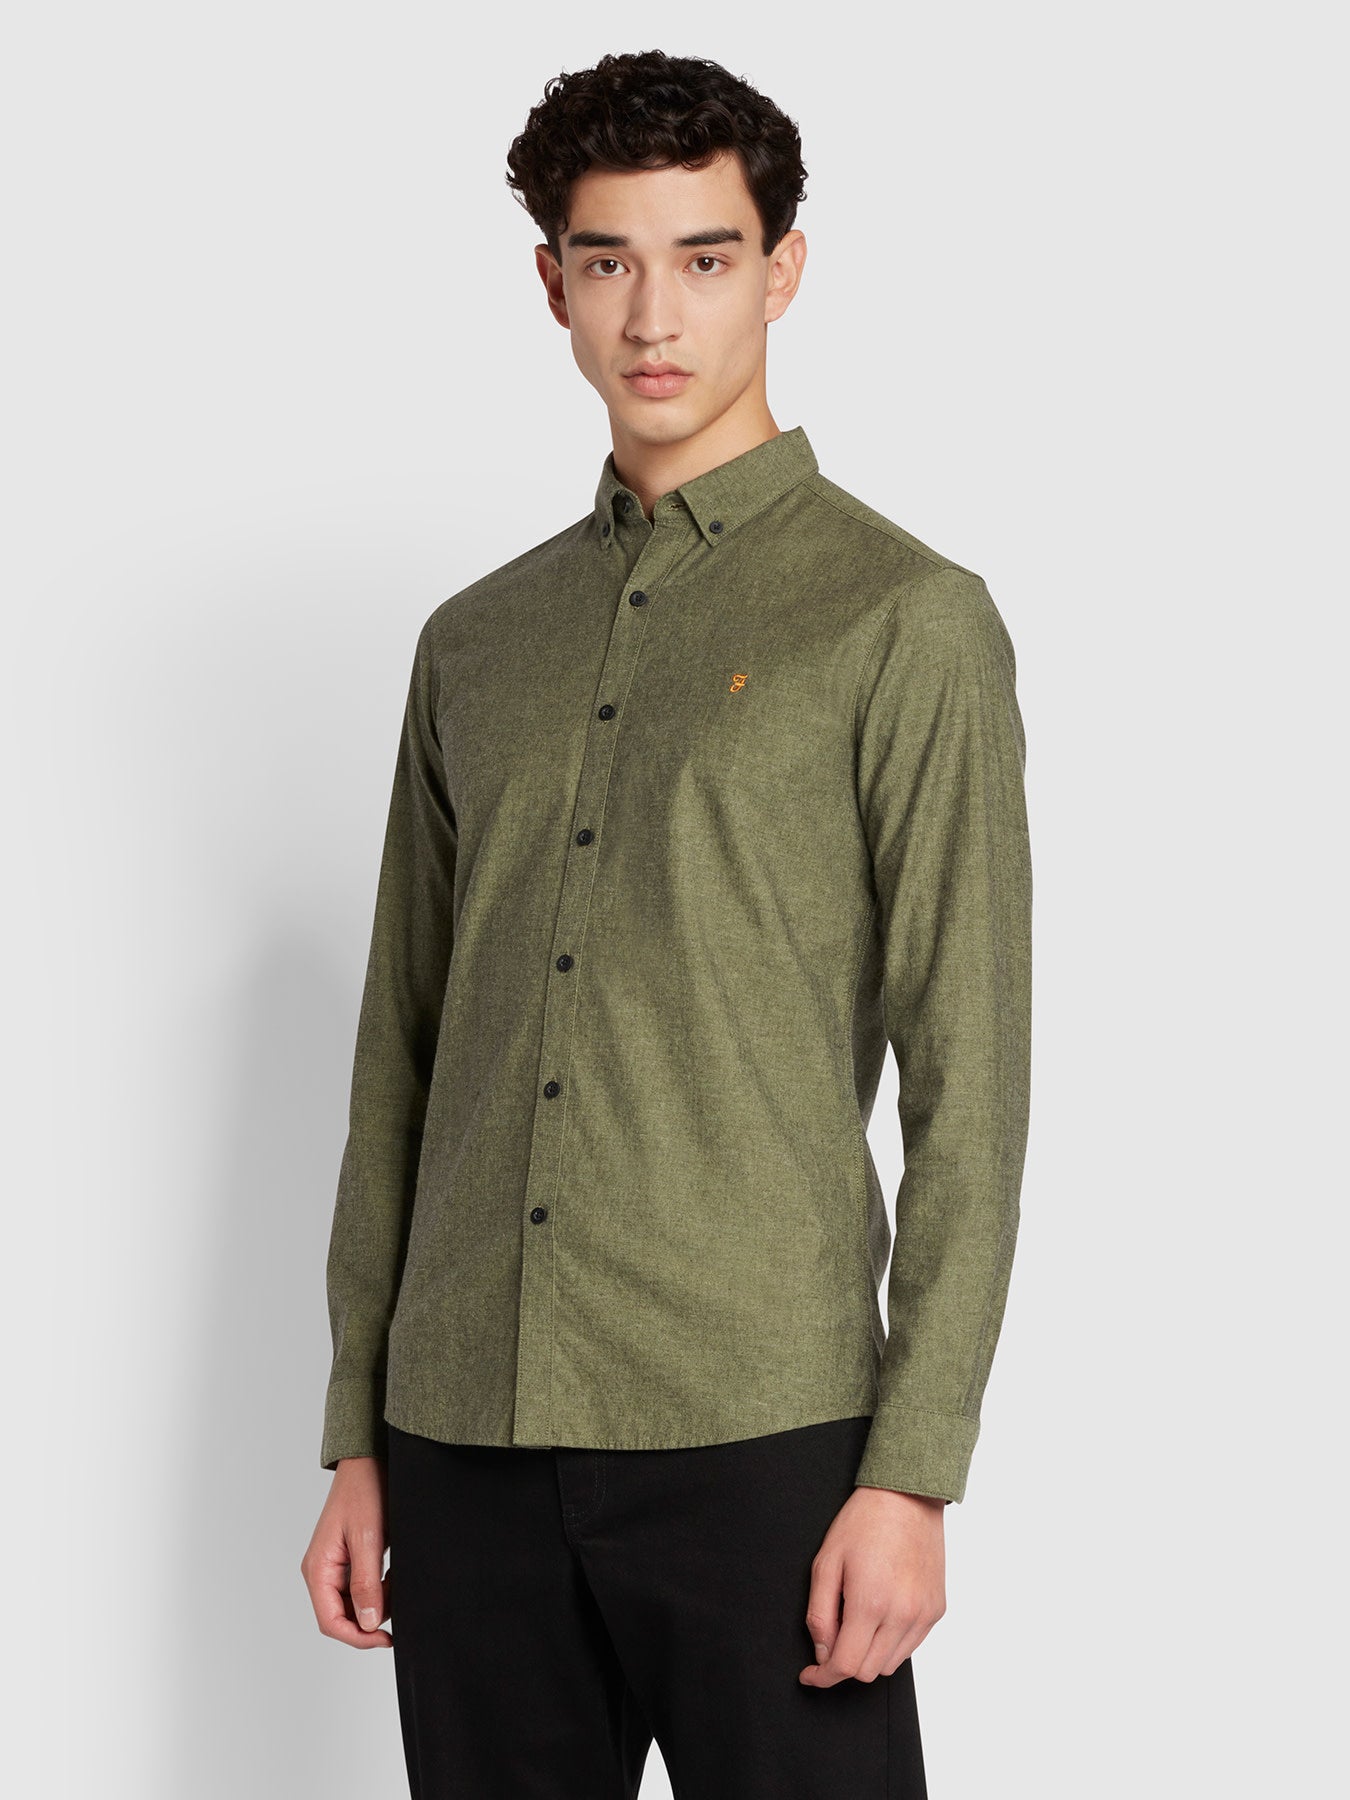 View Steen Slim Fit Brushed Organic Cotton Shirt In Sage Green information